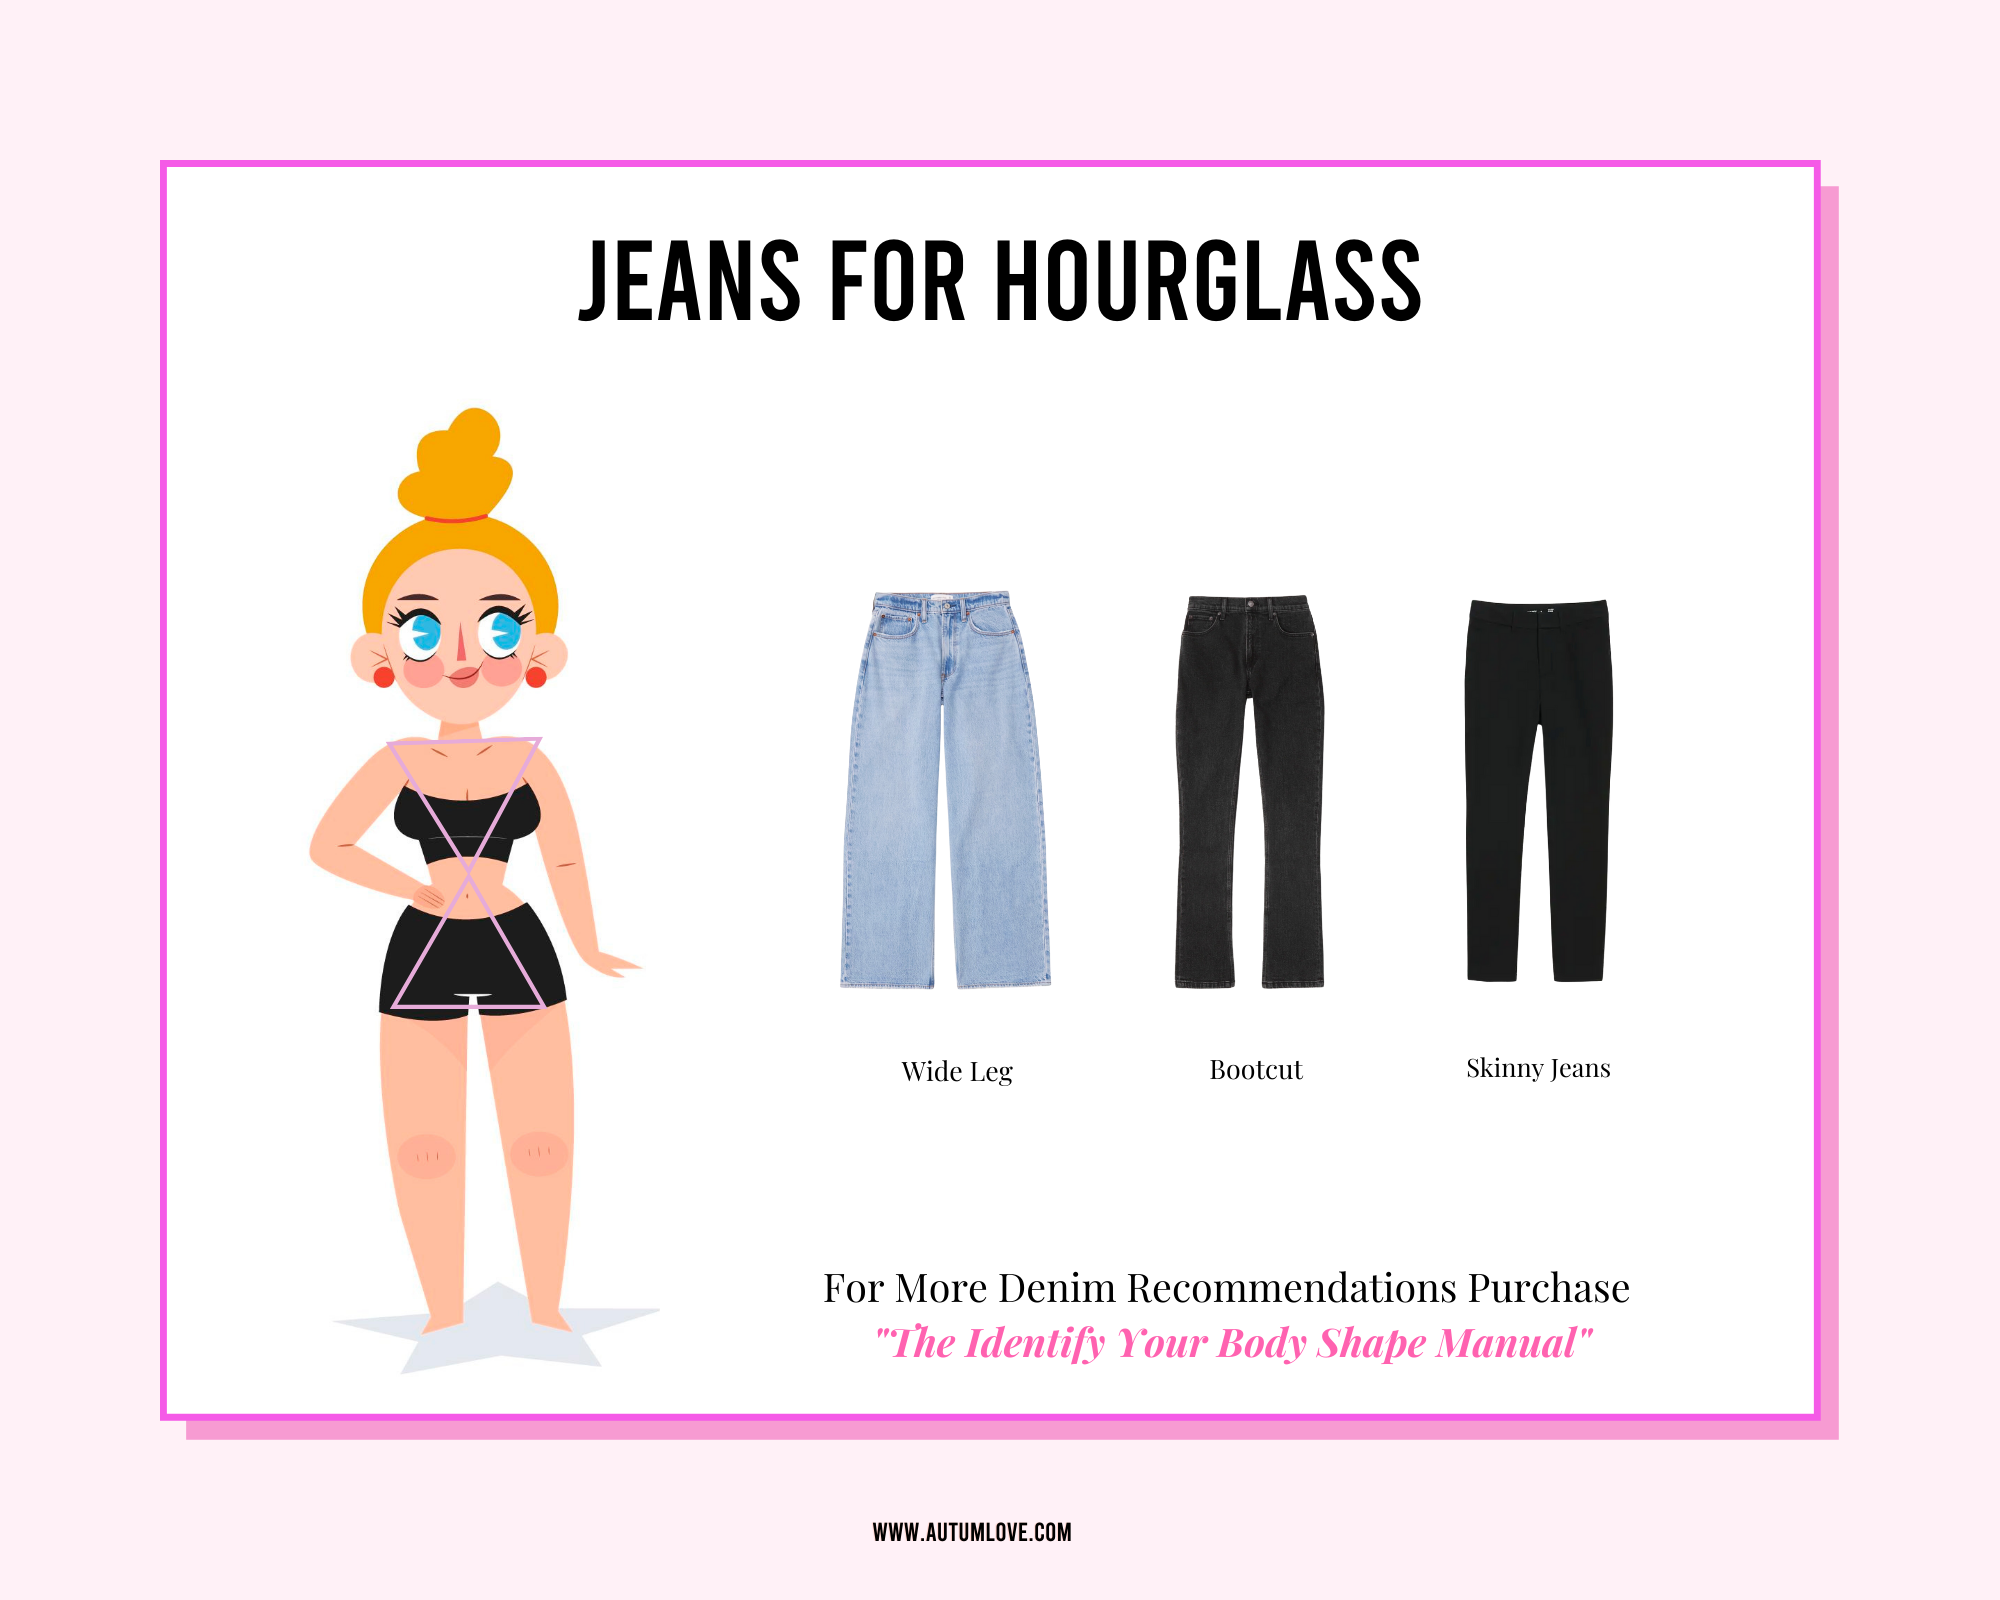 Get Perfect Jeans For Your Body Type (Jeans Fit Guide)